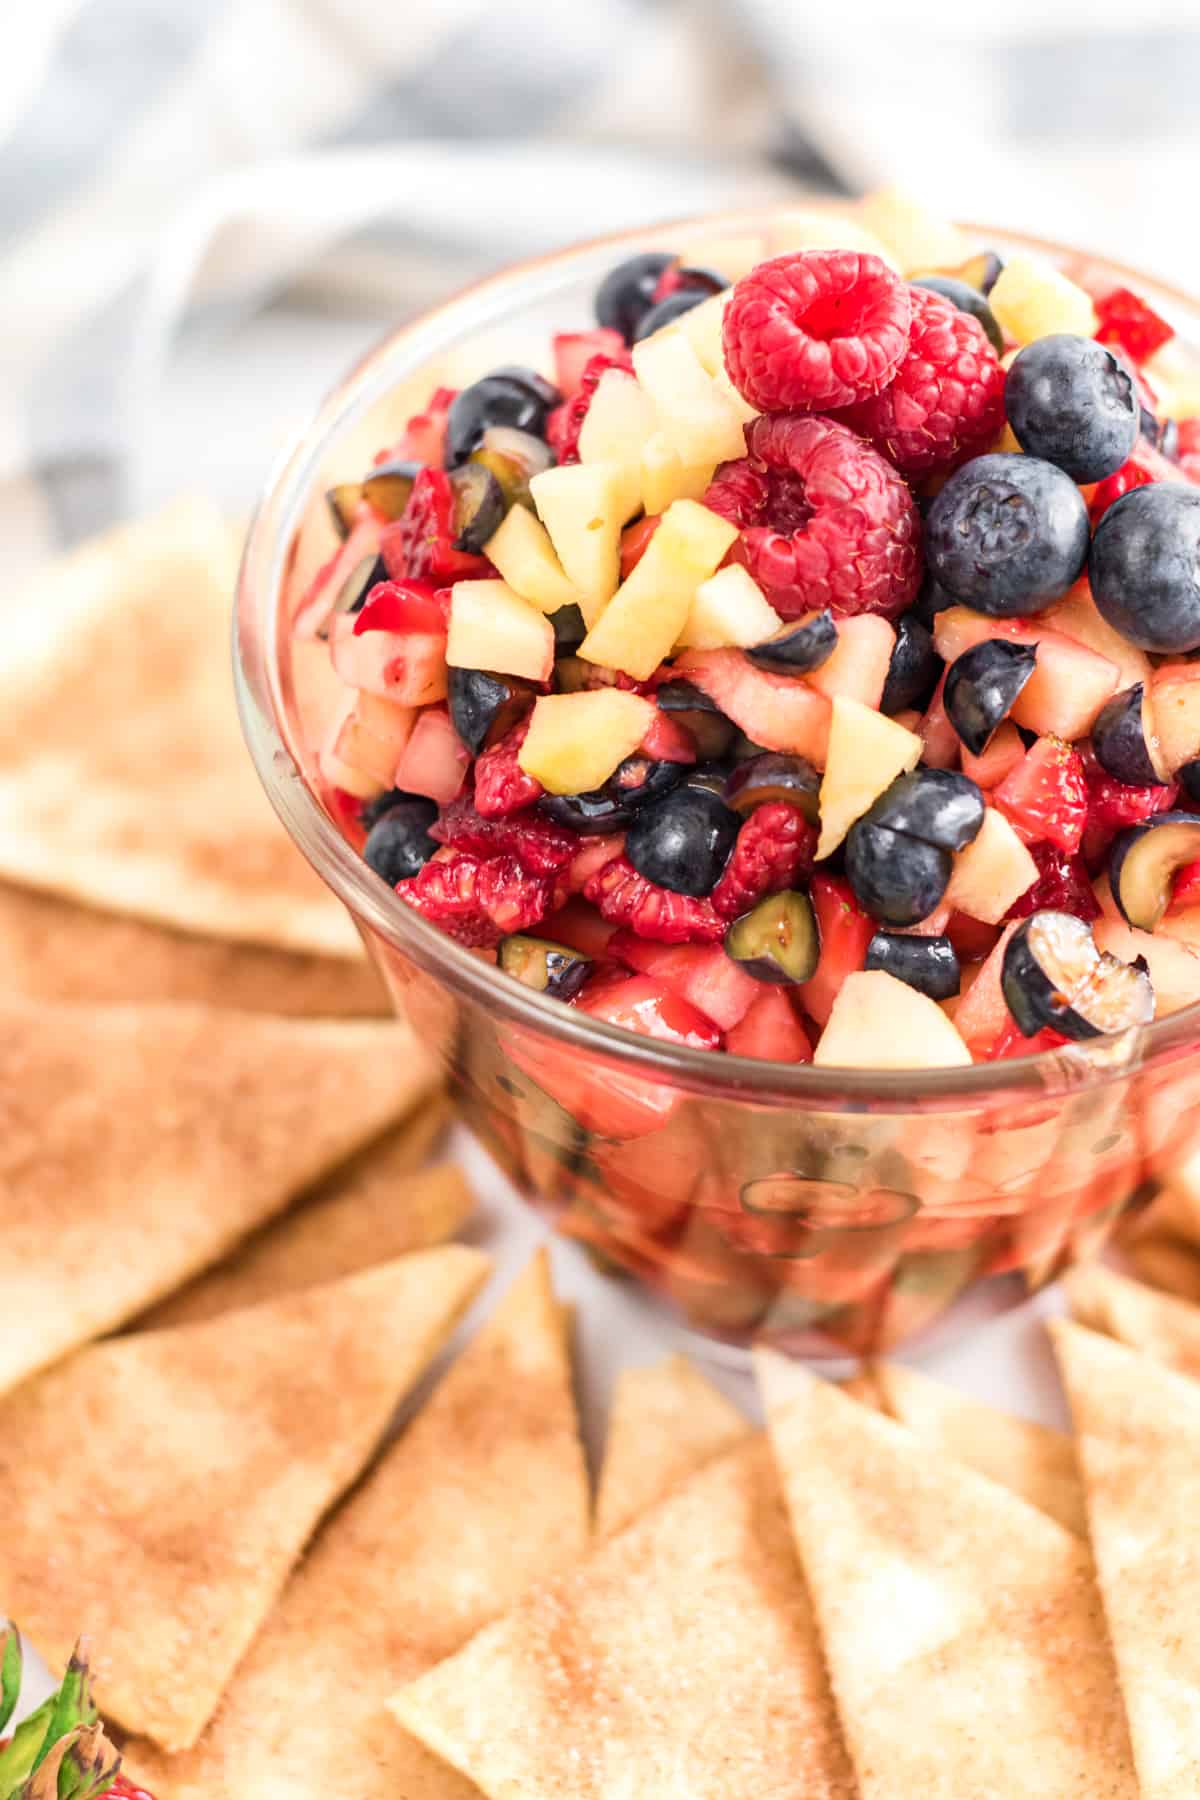 clear bowl of fruit salsa made with raspberries, strawberries, blueberries, and apples. The bowl is surrounded by cinnamon sugar tortilla chips on a platter.